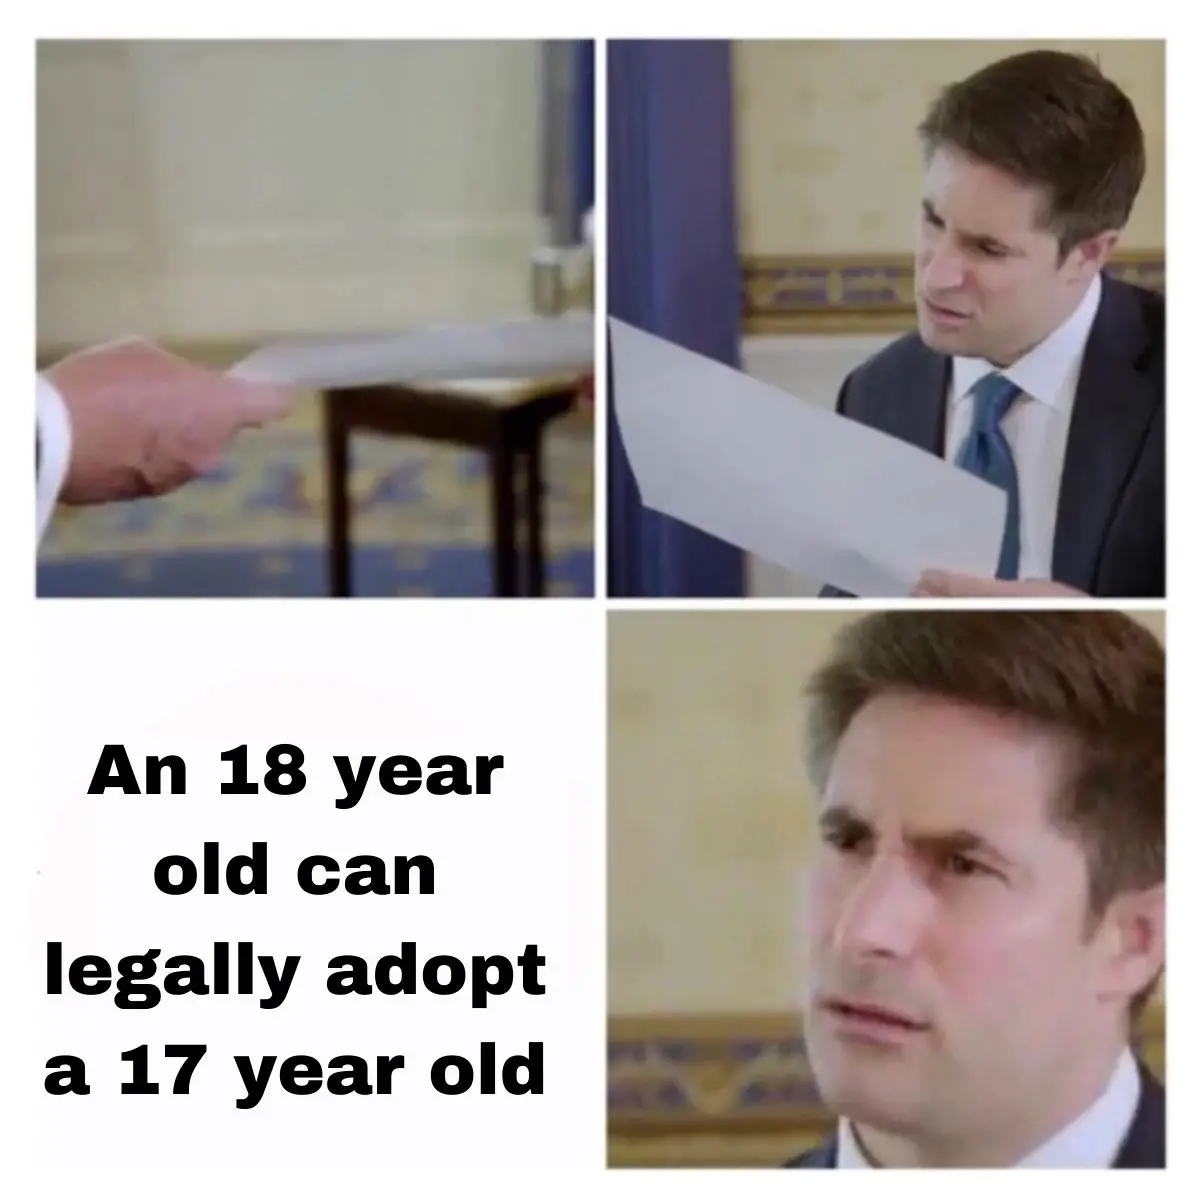 Adoption meme on An 18 year old can legally adopt a 17 year old